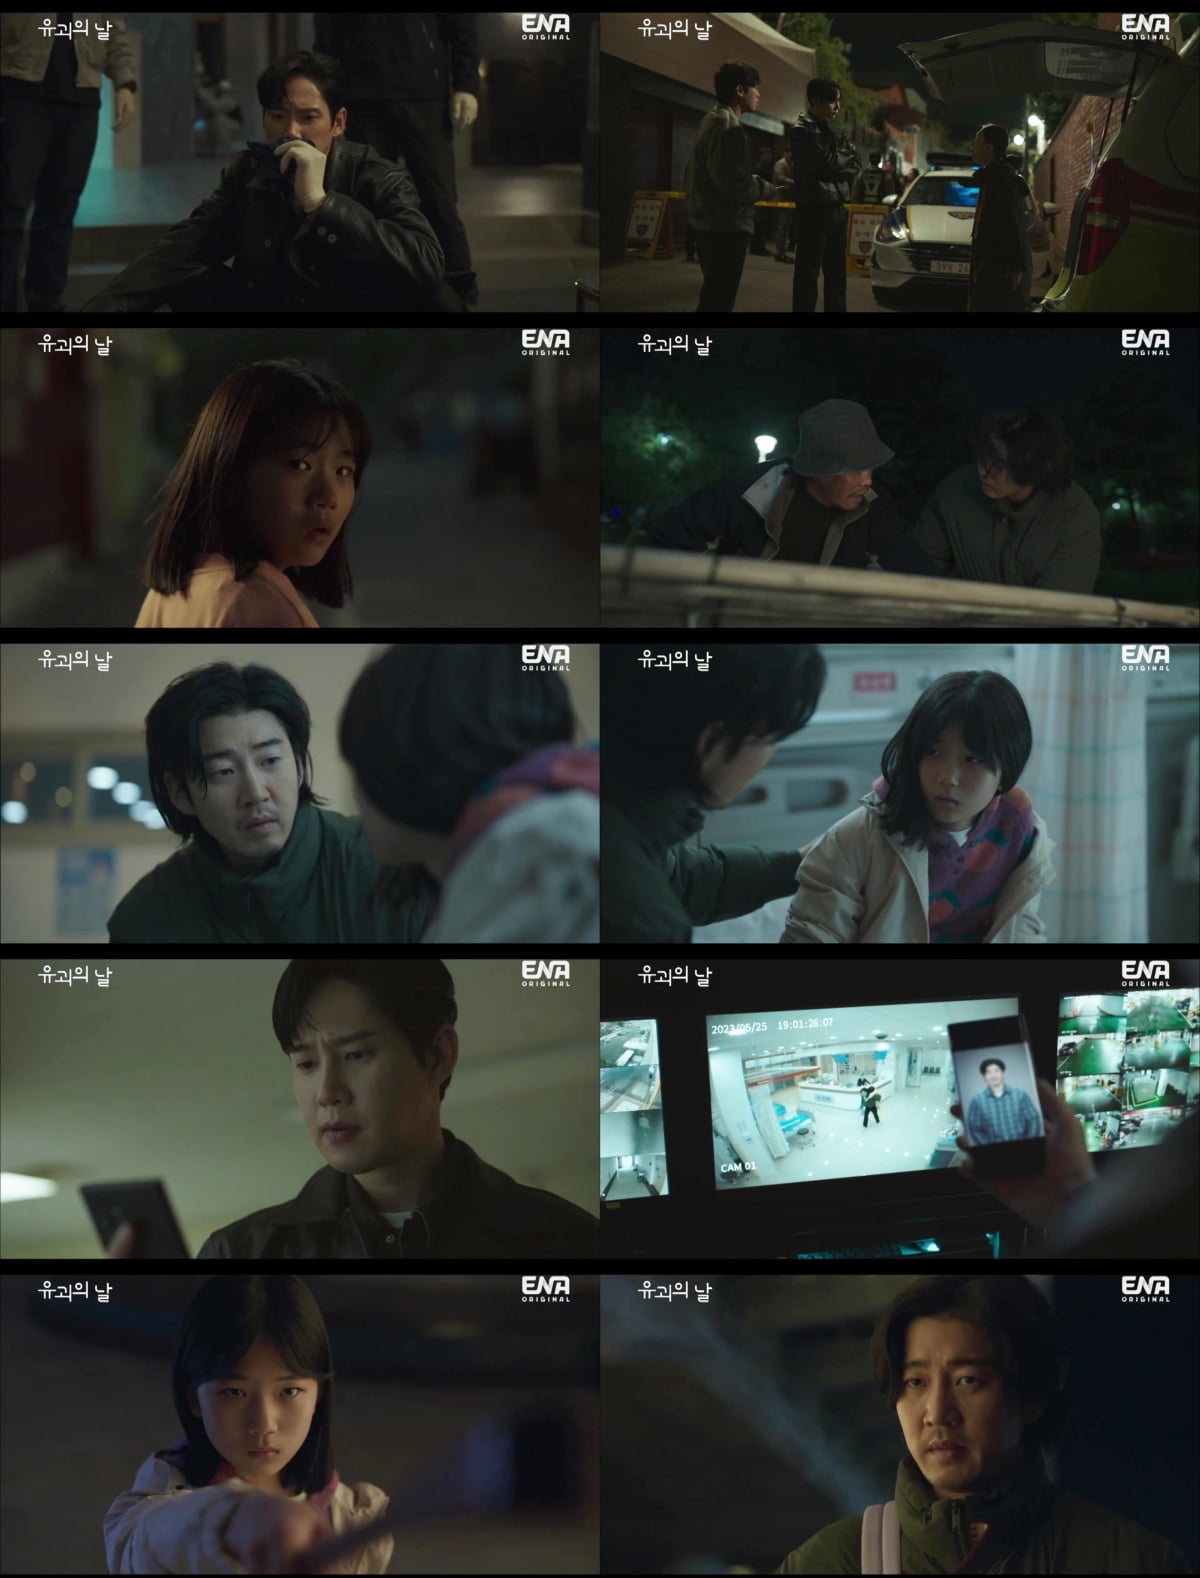 Yoon Kye-sang becomes a murder suspect